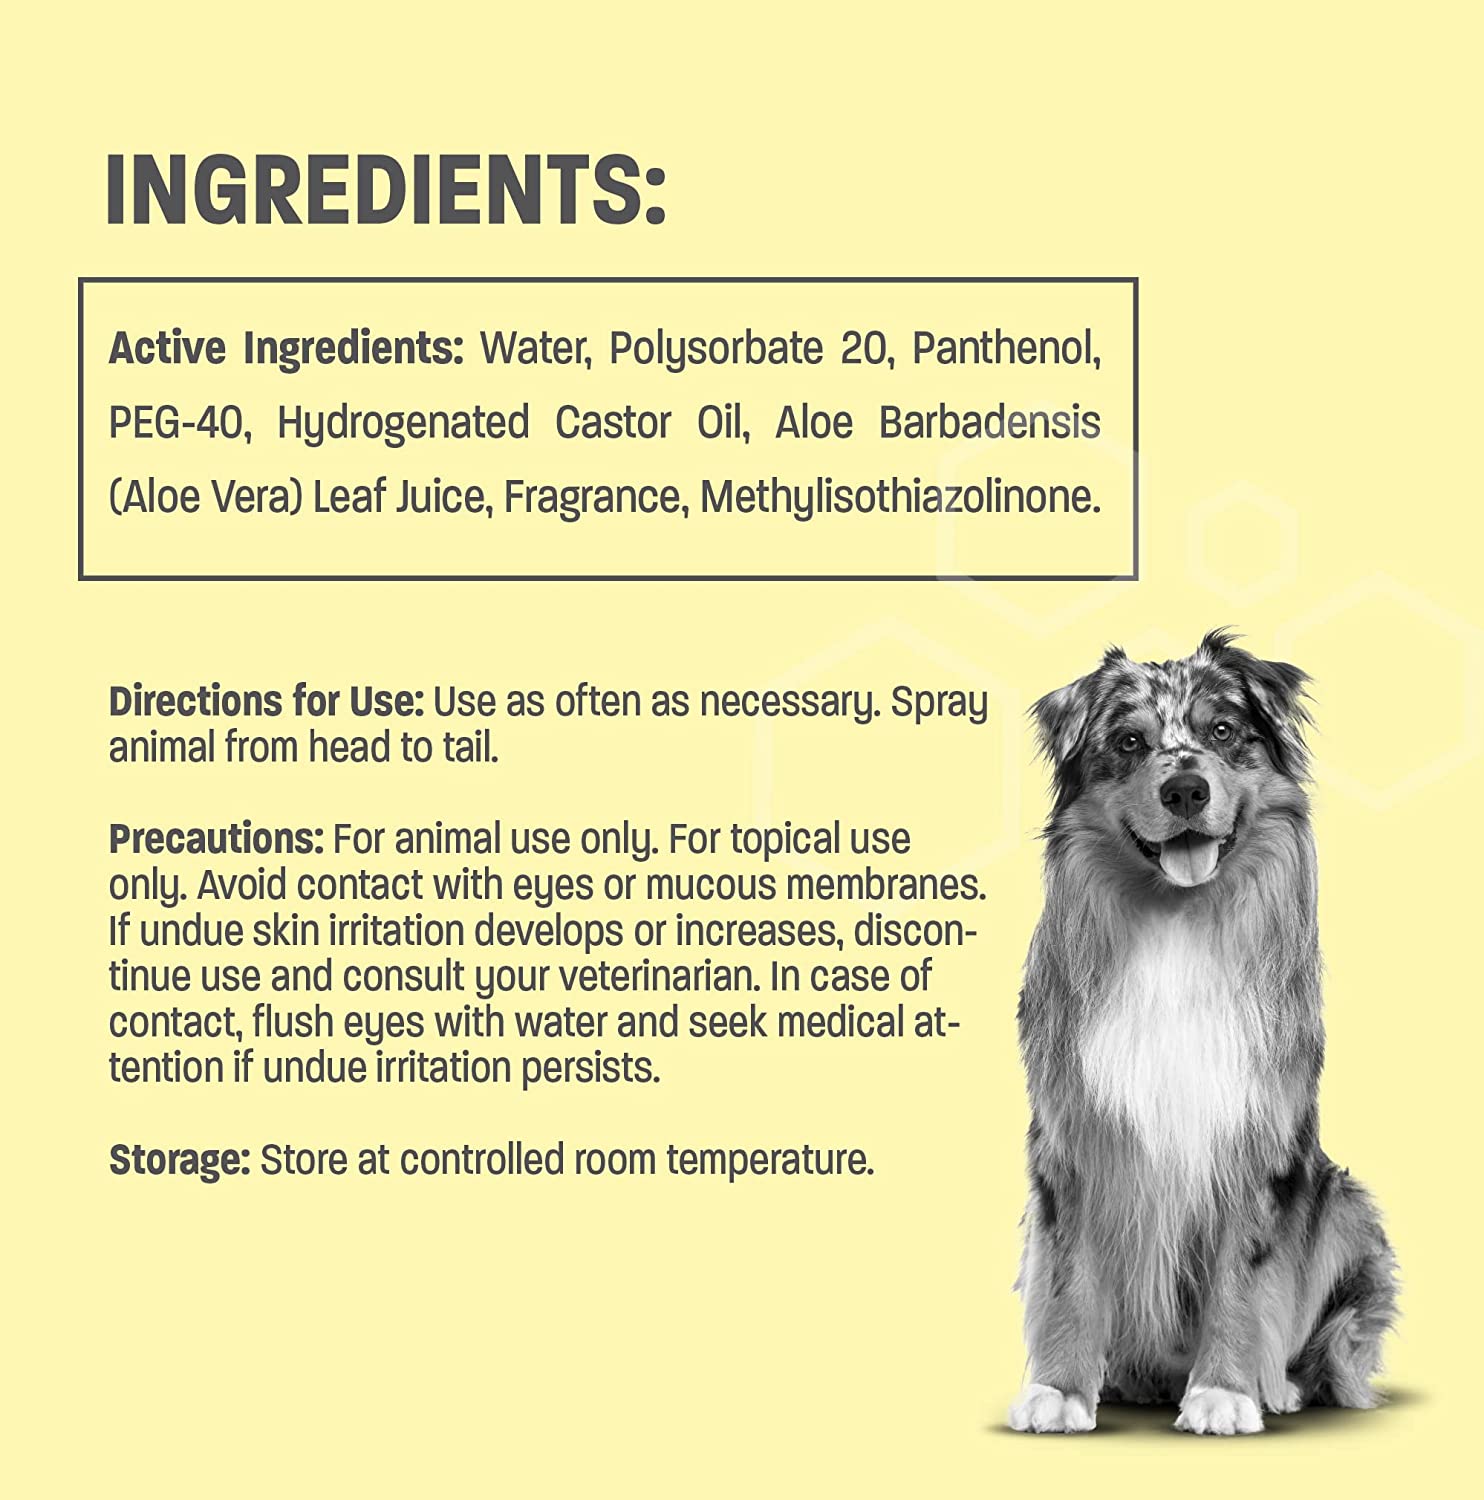 Deodorizing Spray for Dogs and Cats